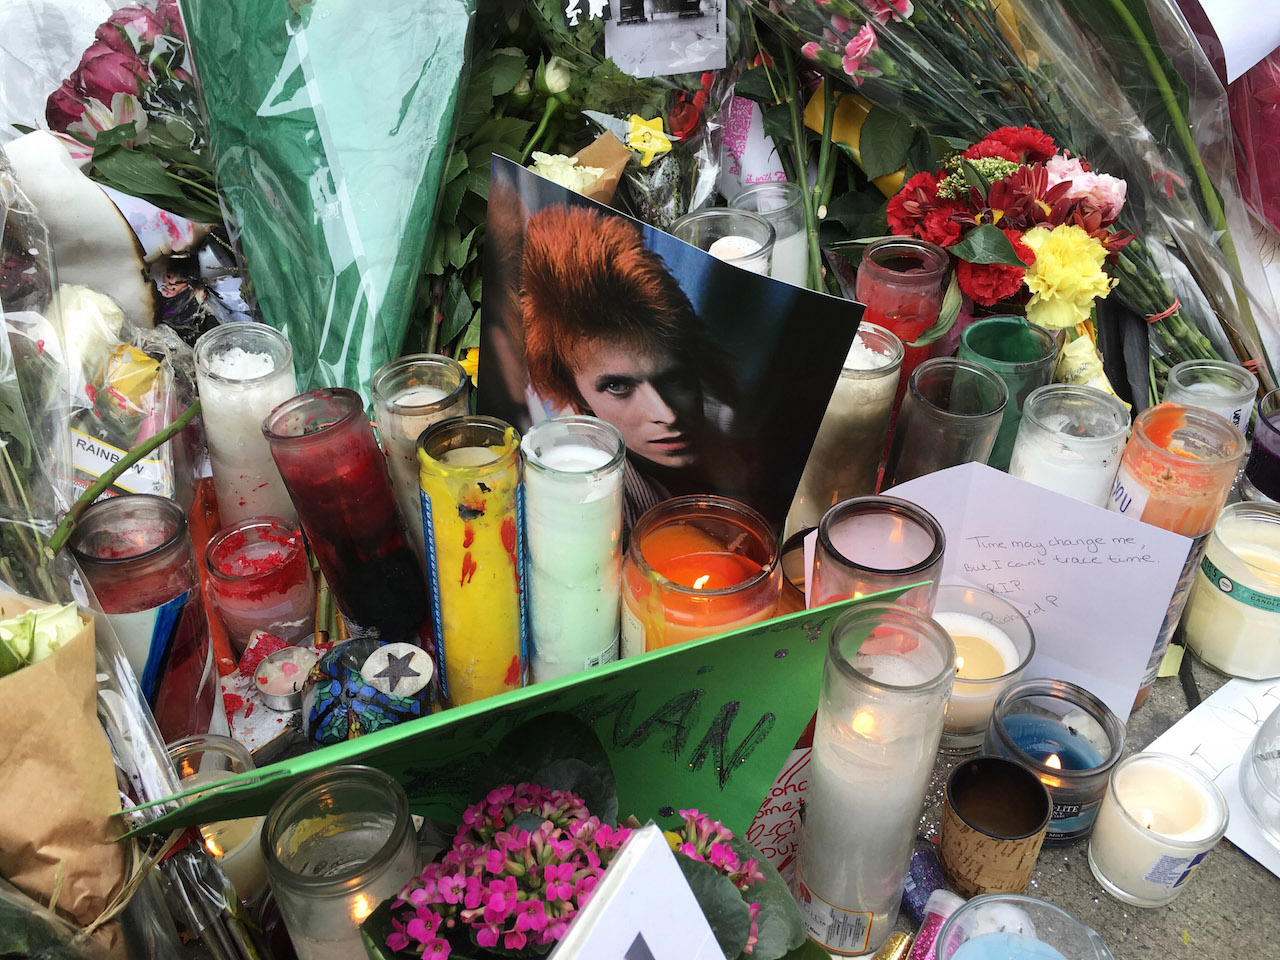 A photo of David Bowie during his Ziggy Stardust period amid votive candles and flowers at the memorial in front of his Soho building.  Photo by Q. Sakamaki 